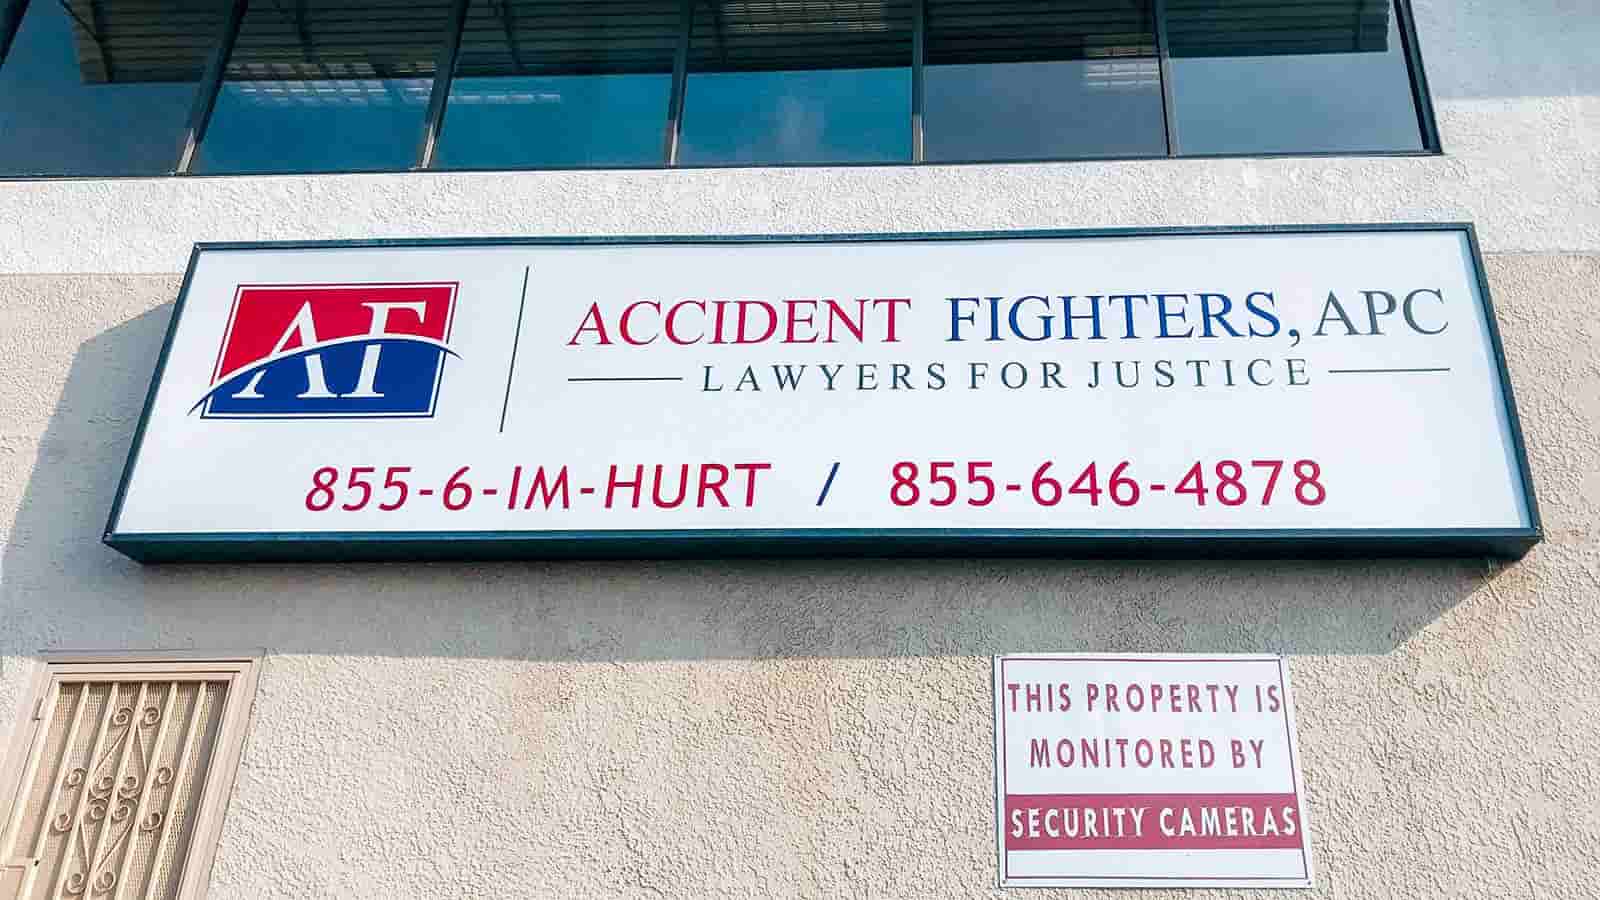 accident fighters apc exterior lightbox sign